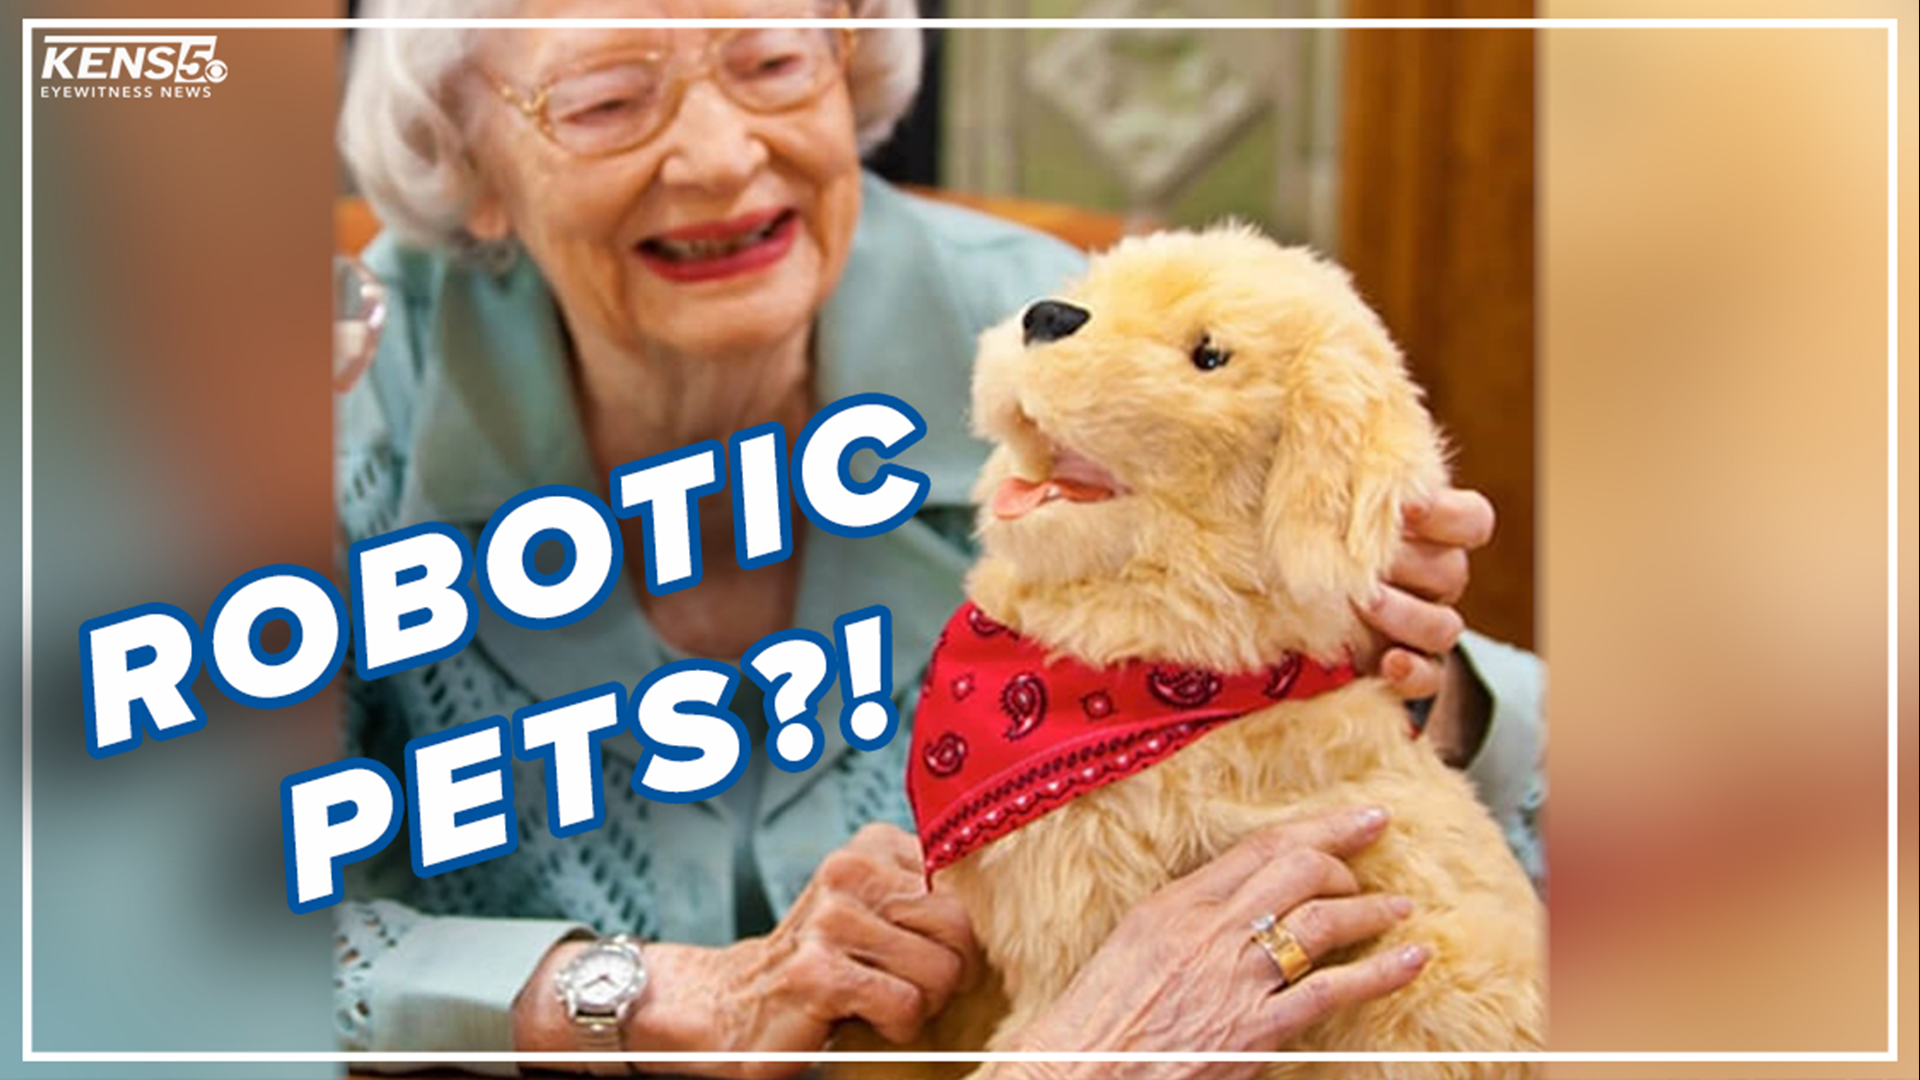 If you're looking for a companion, especially in the pandemic, The Alzheimer's Store has an option for you — robotic pets. Digital reporter Lexi Hazlett shares more.